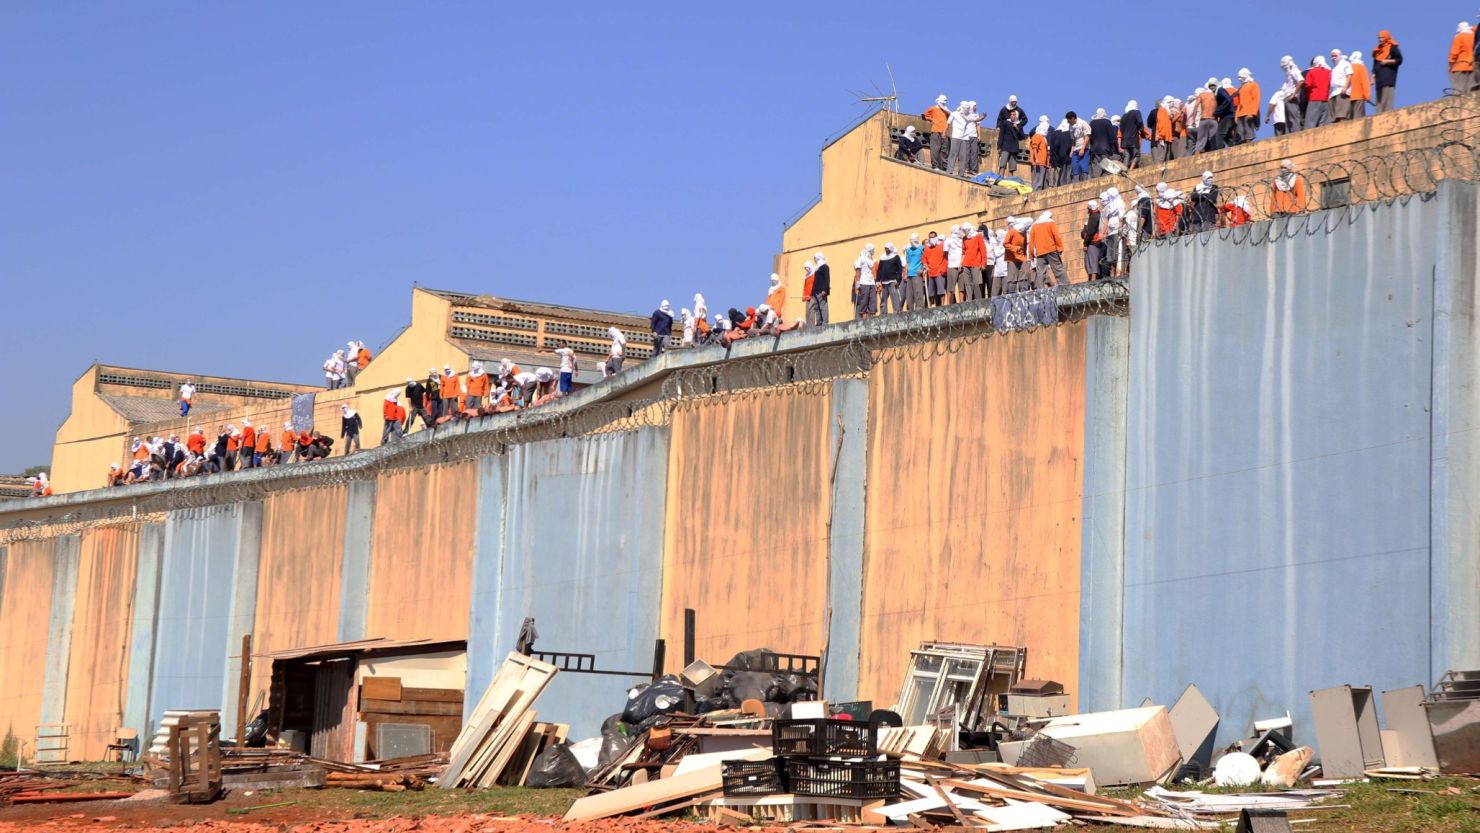 Inmates stand on the roof of the penitentiary in Cascavel, Parana state, Brazil, on August 25, 2014.